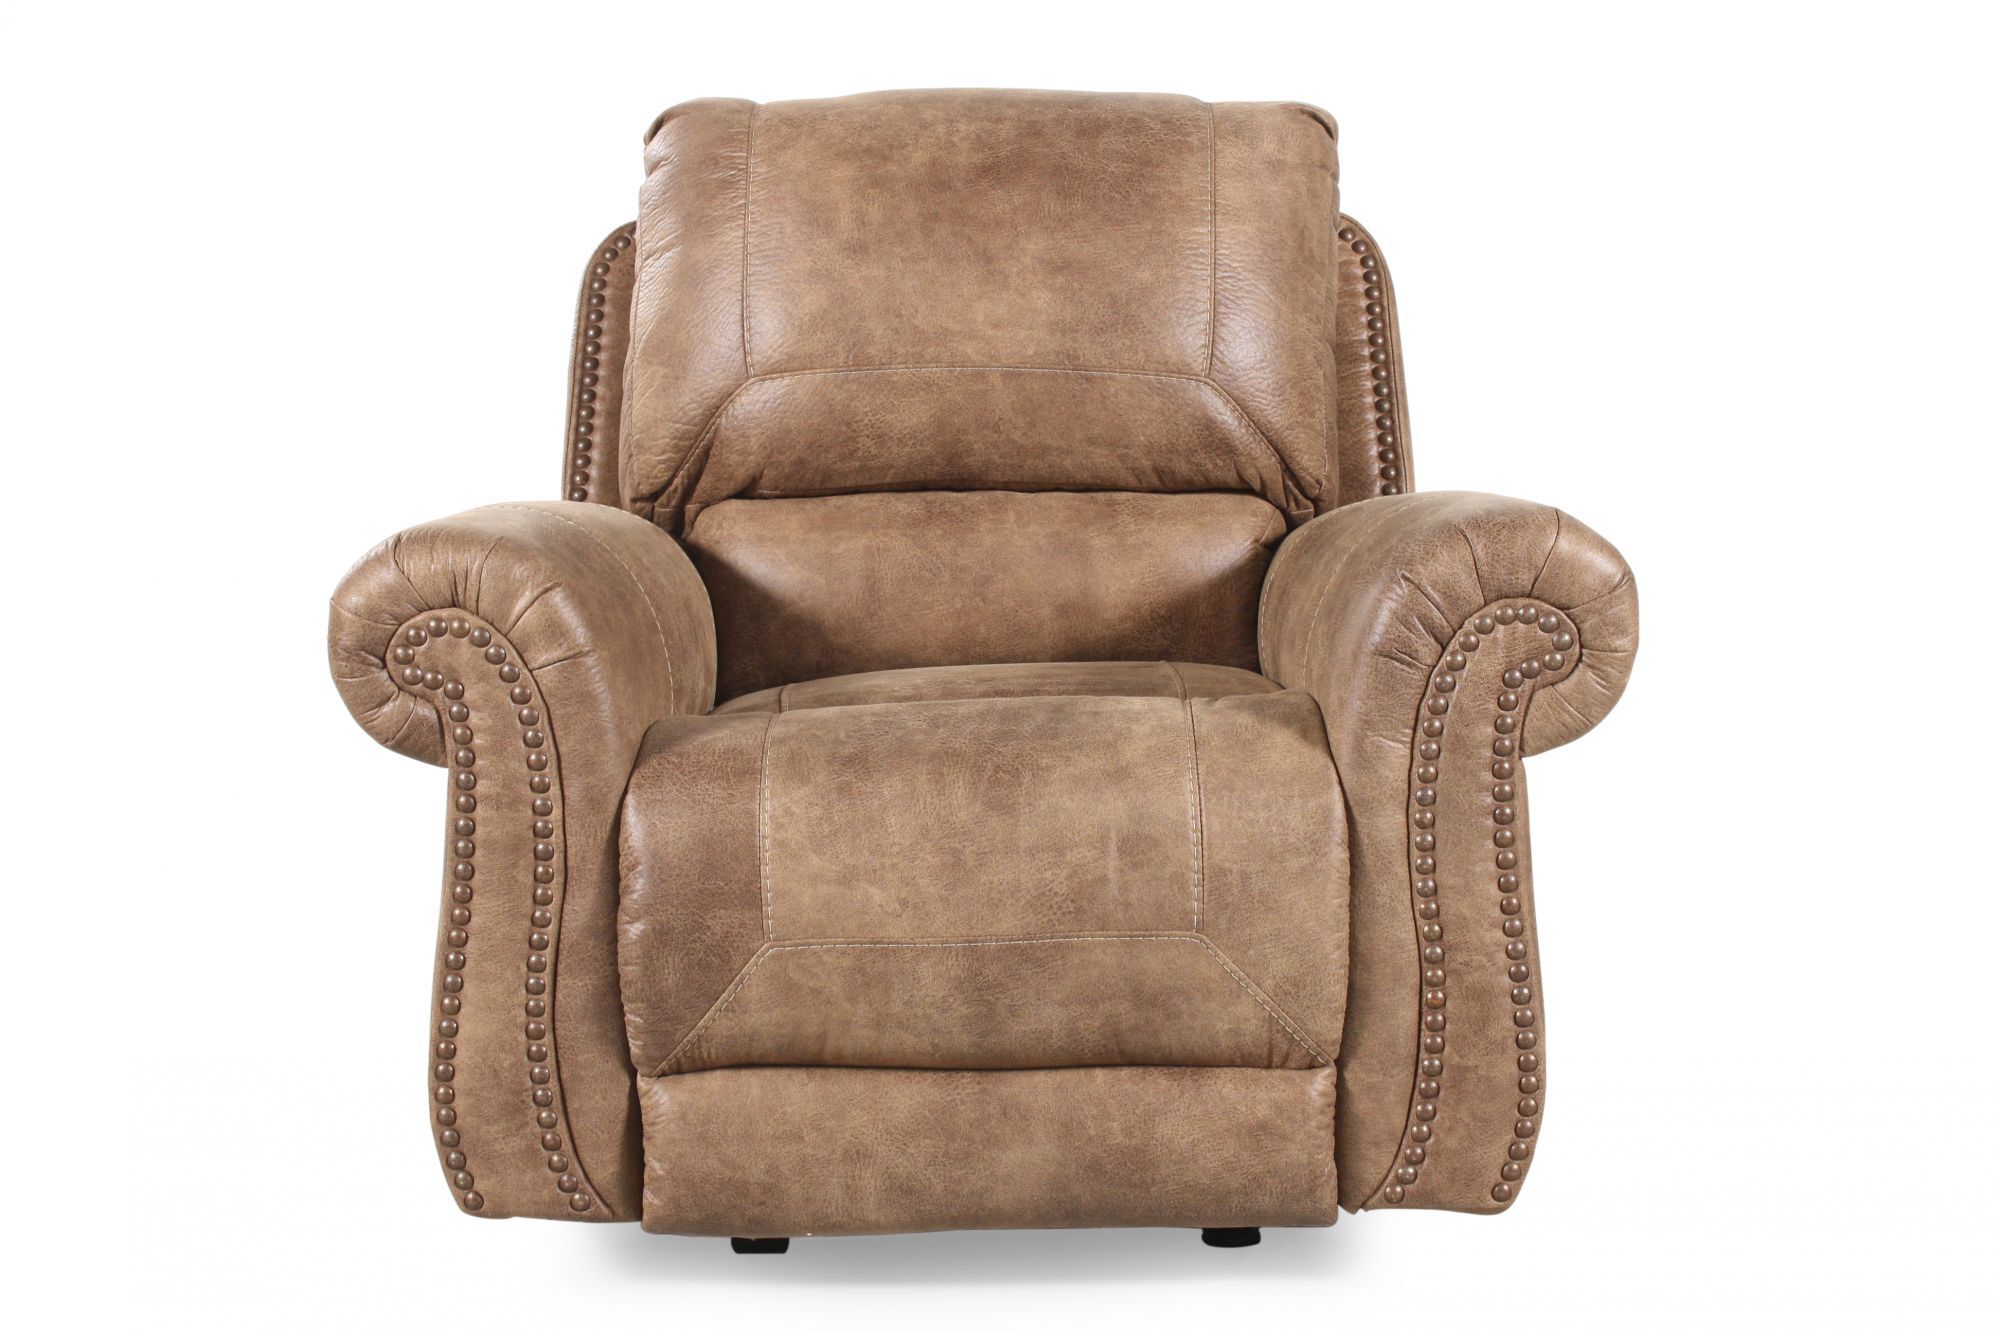 mathis brothers lazy boy recliner sale